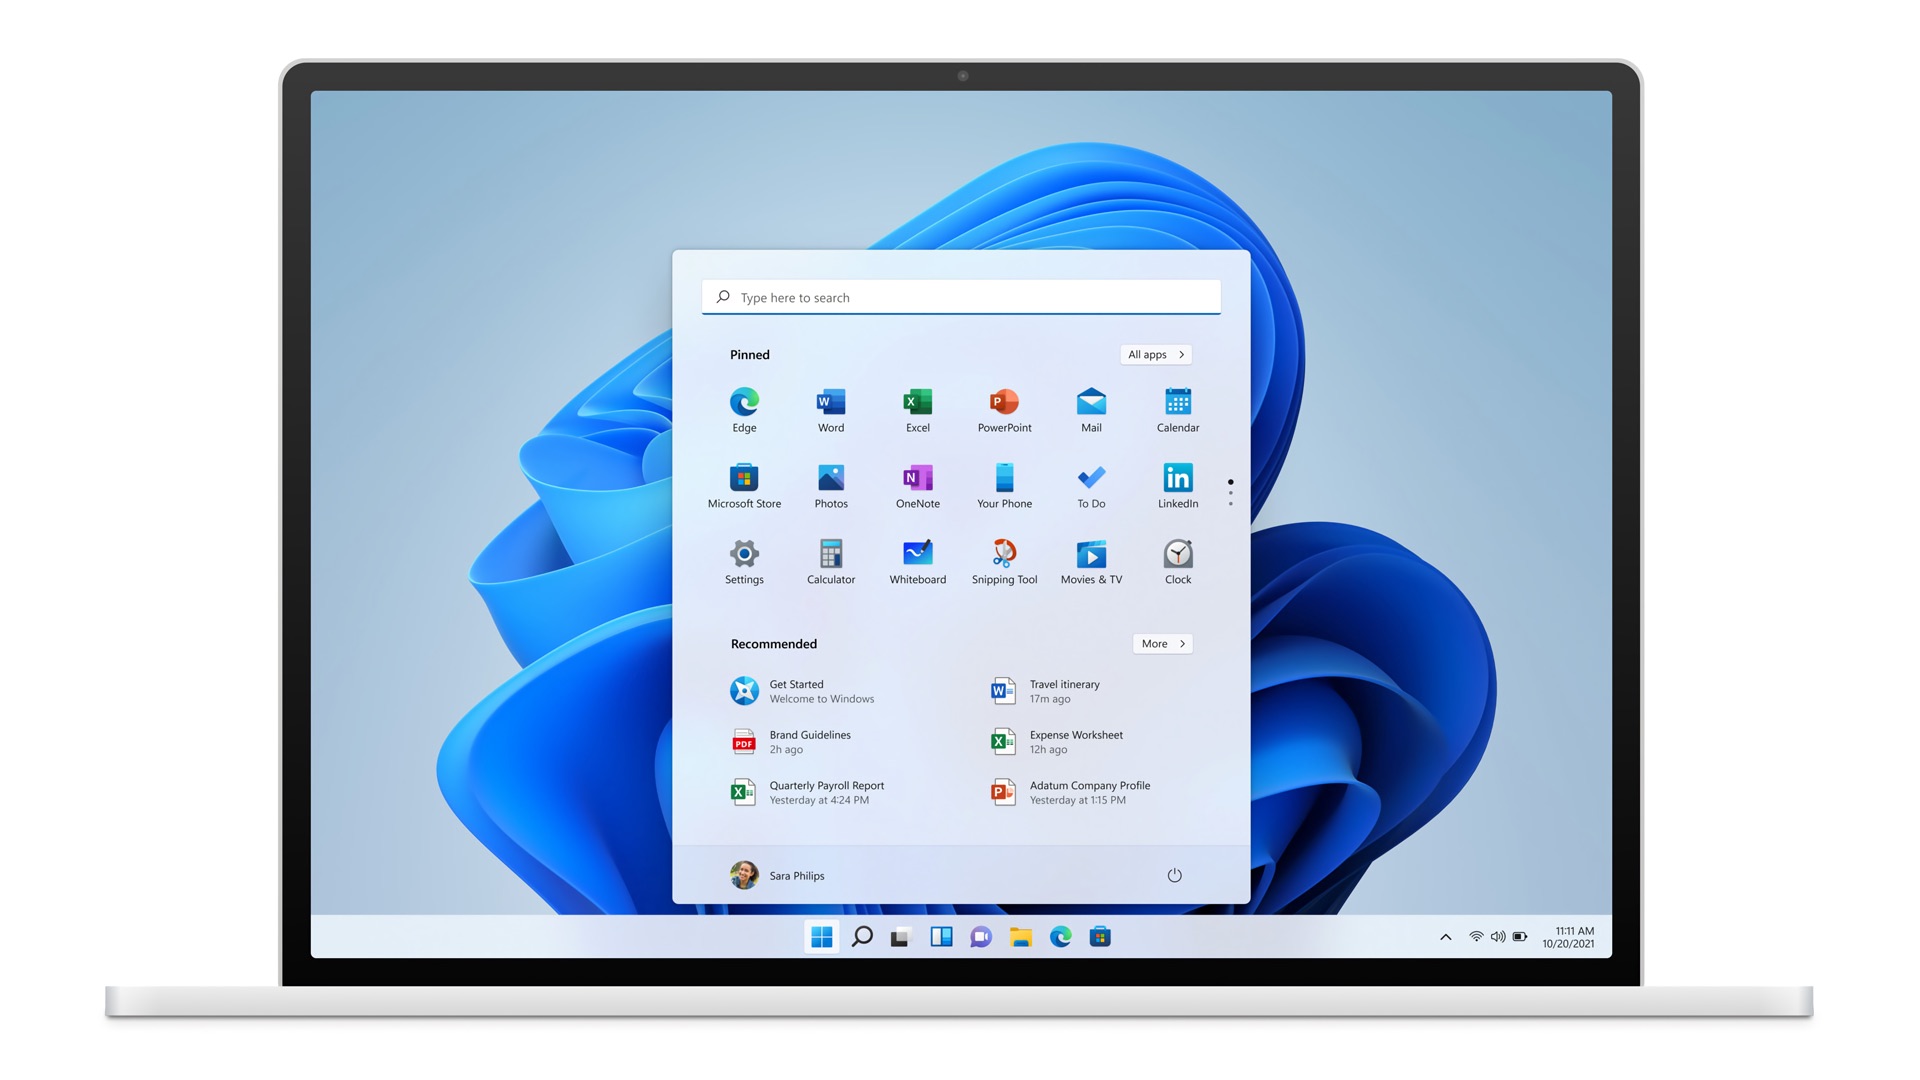 windows for parallels download